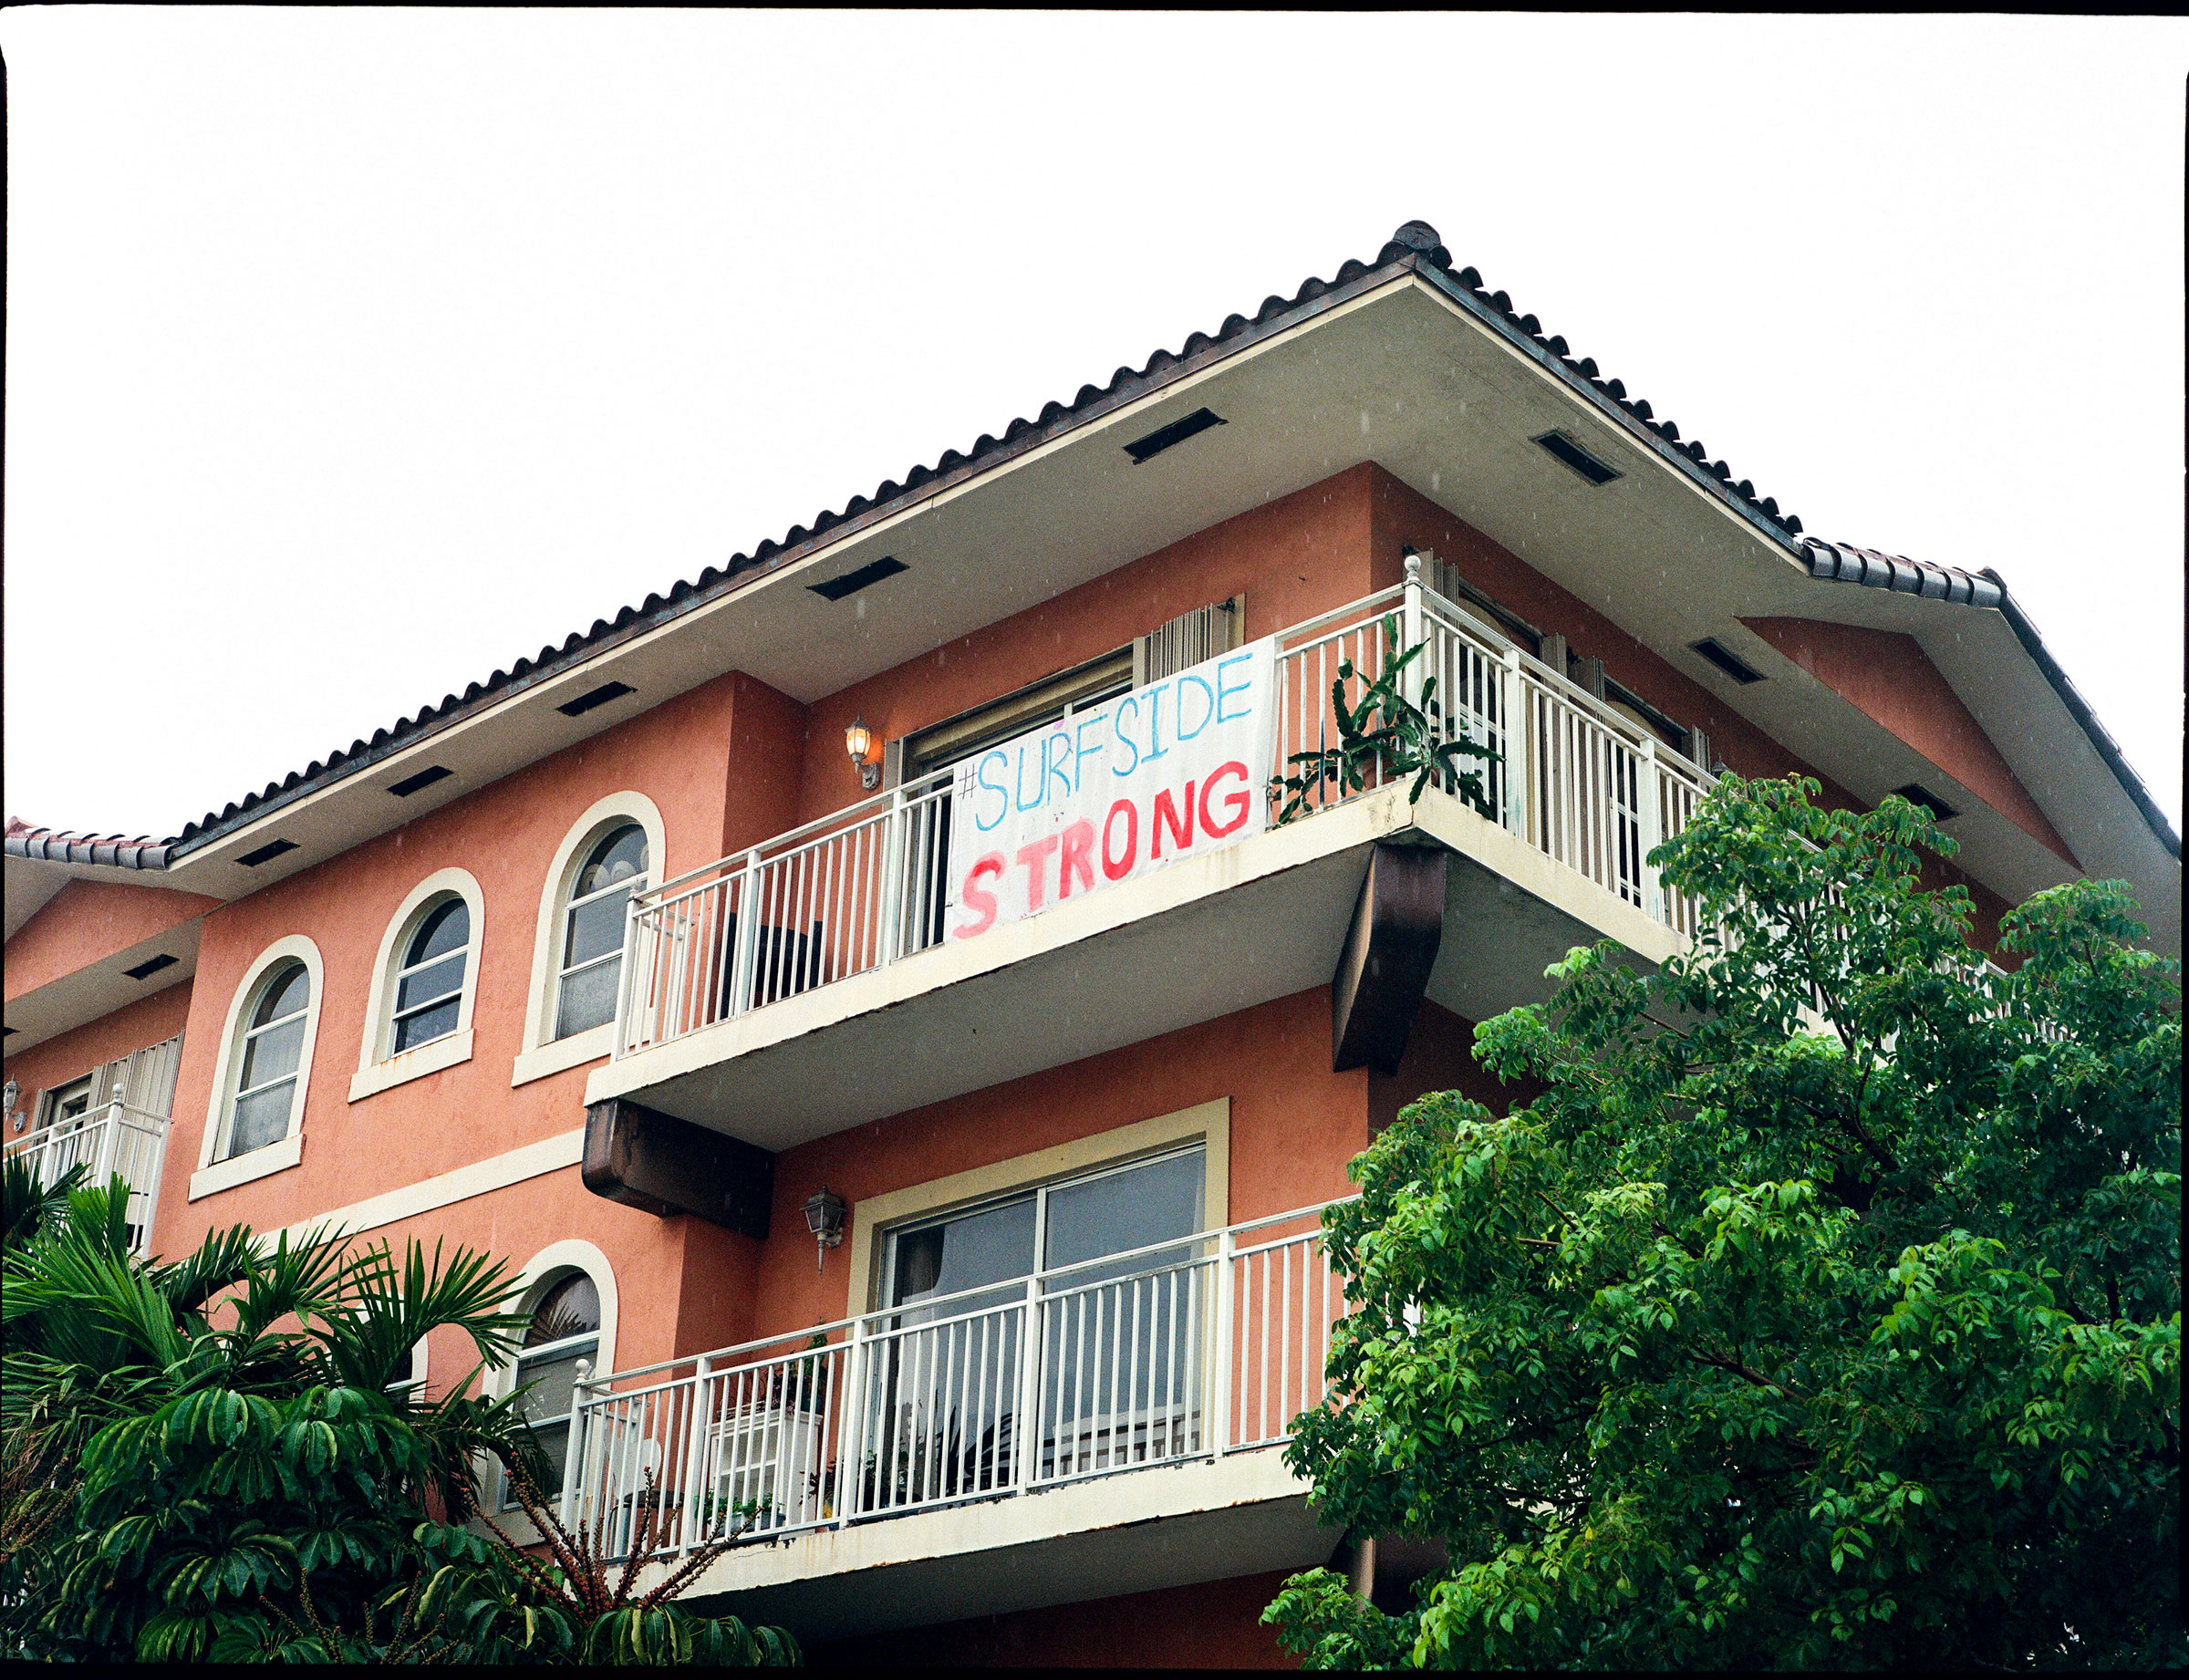 A sign, that reads "Surfside Strong", hangs off of the balcony of a nearby apartment building. (Ysa Pérez for TIME)